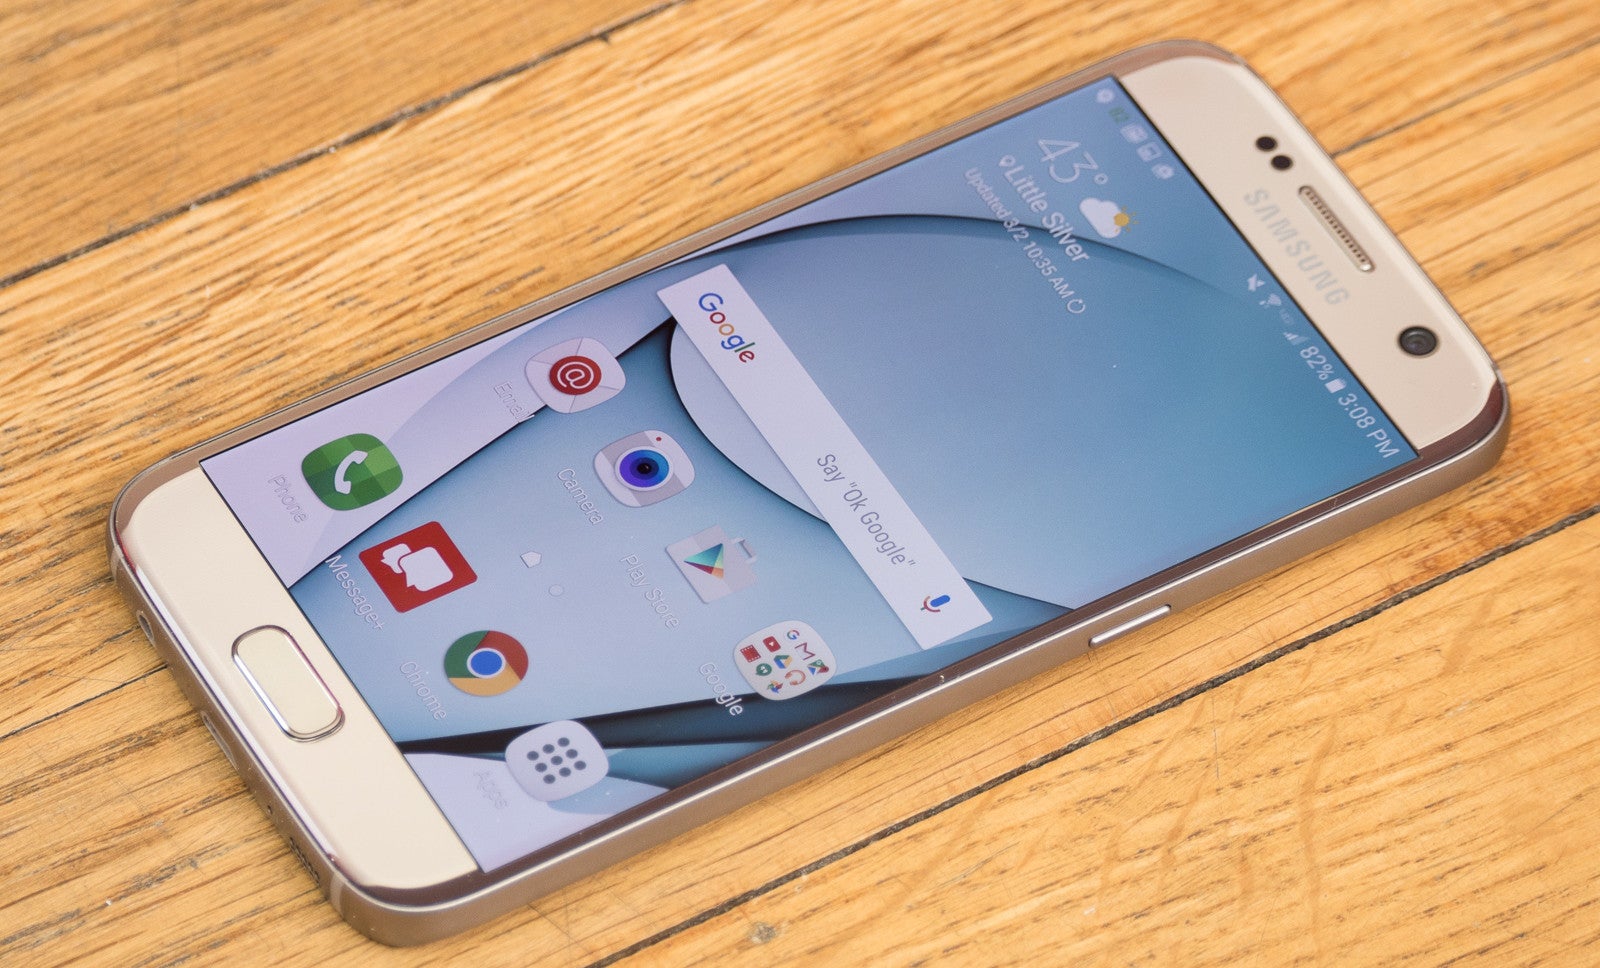 AT&T rolls out Galaxy S7 update that adds June security patch, Knox and Messaging fixes